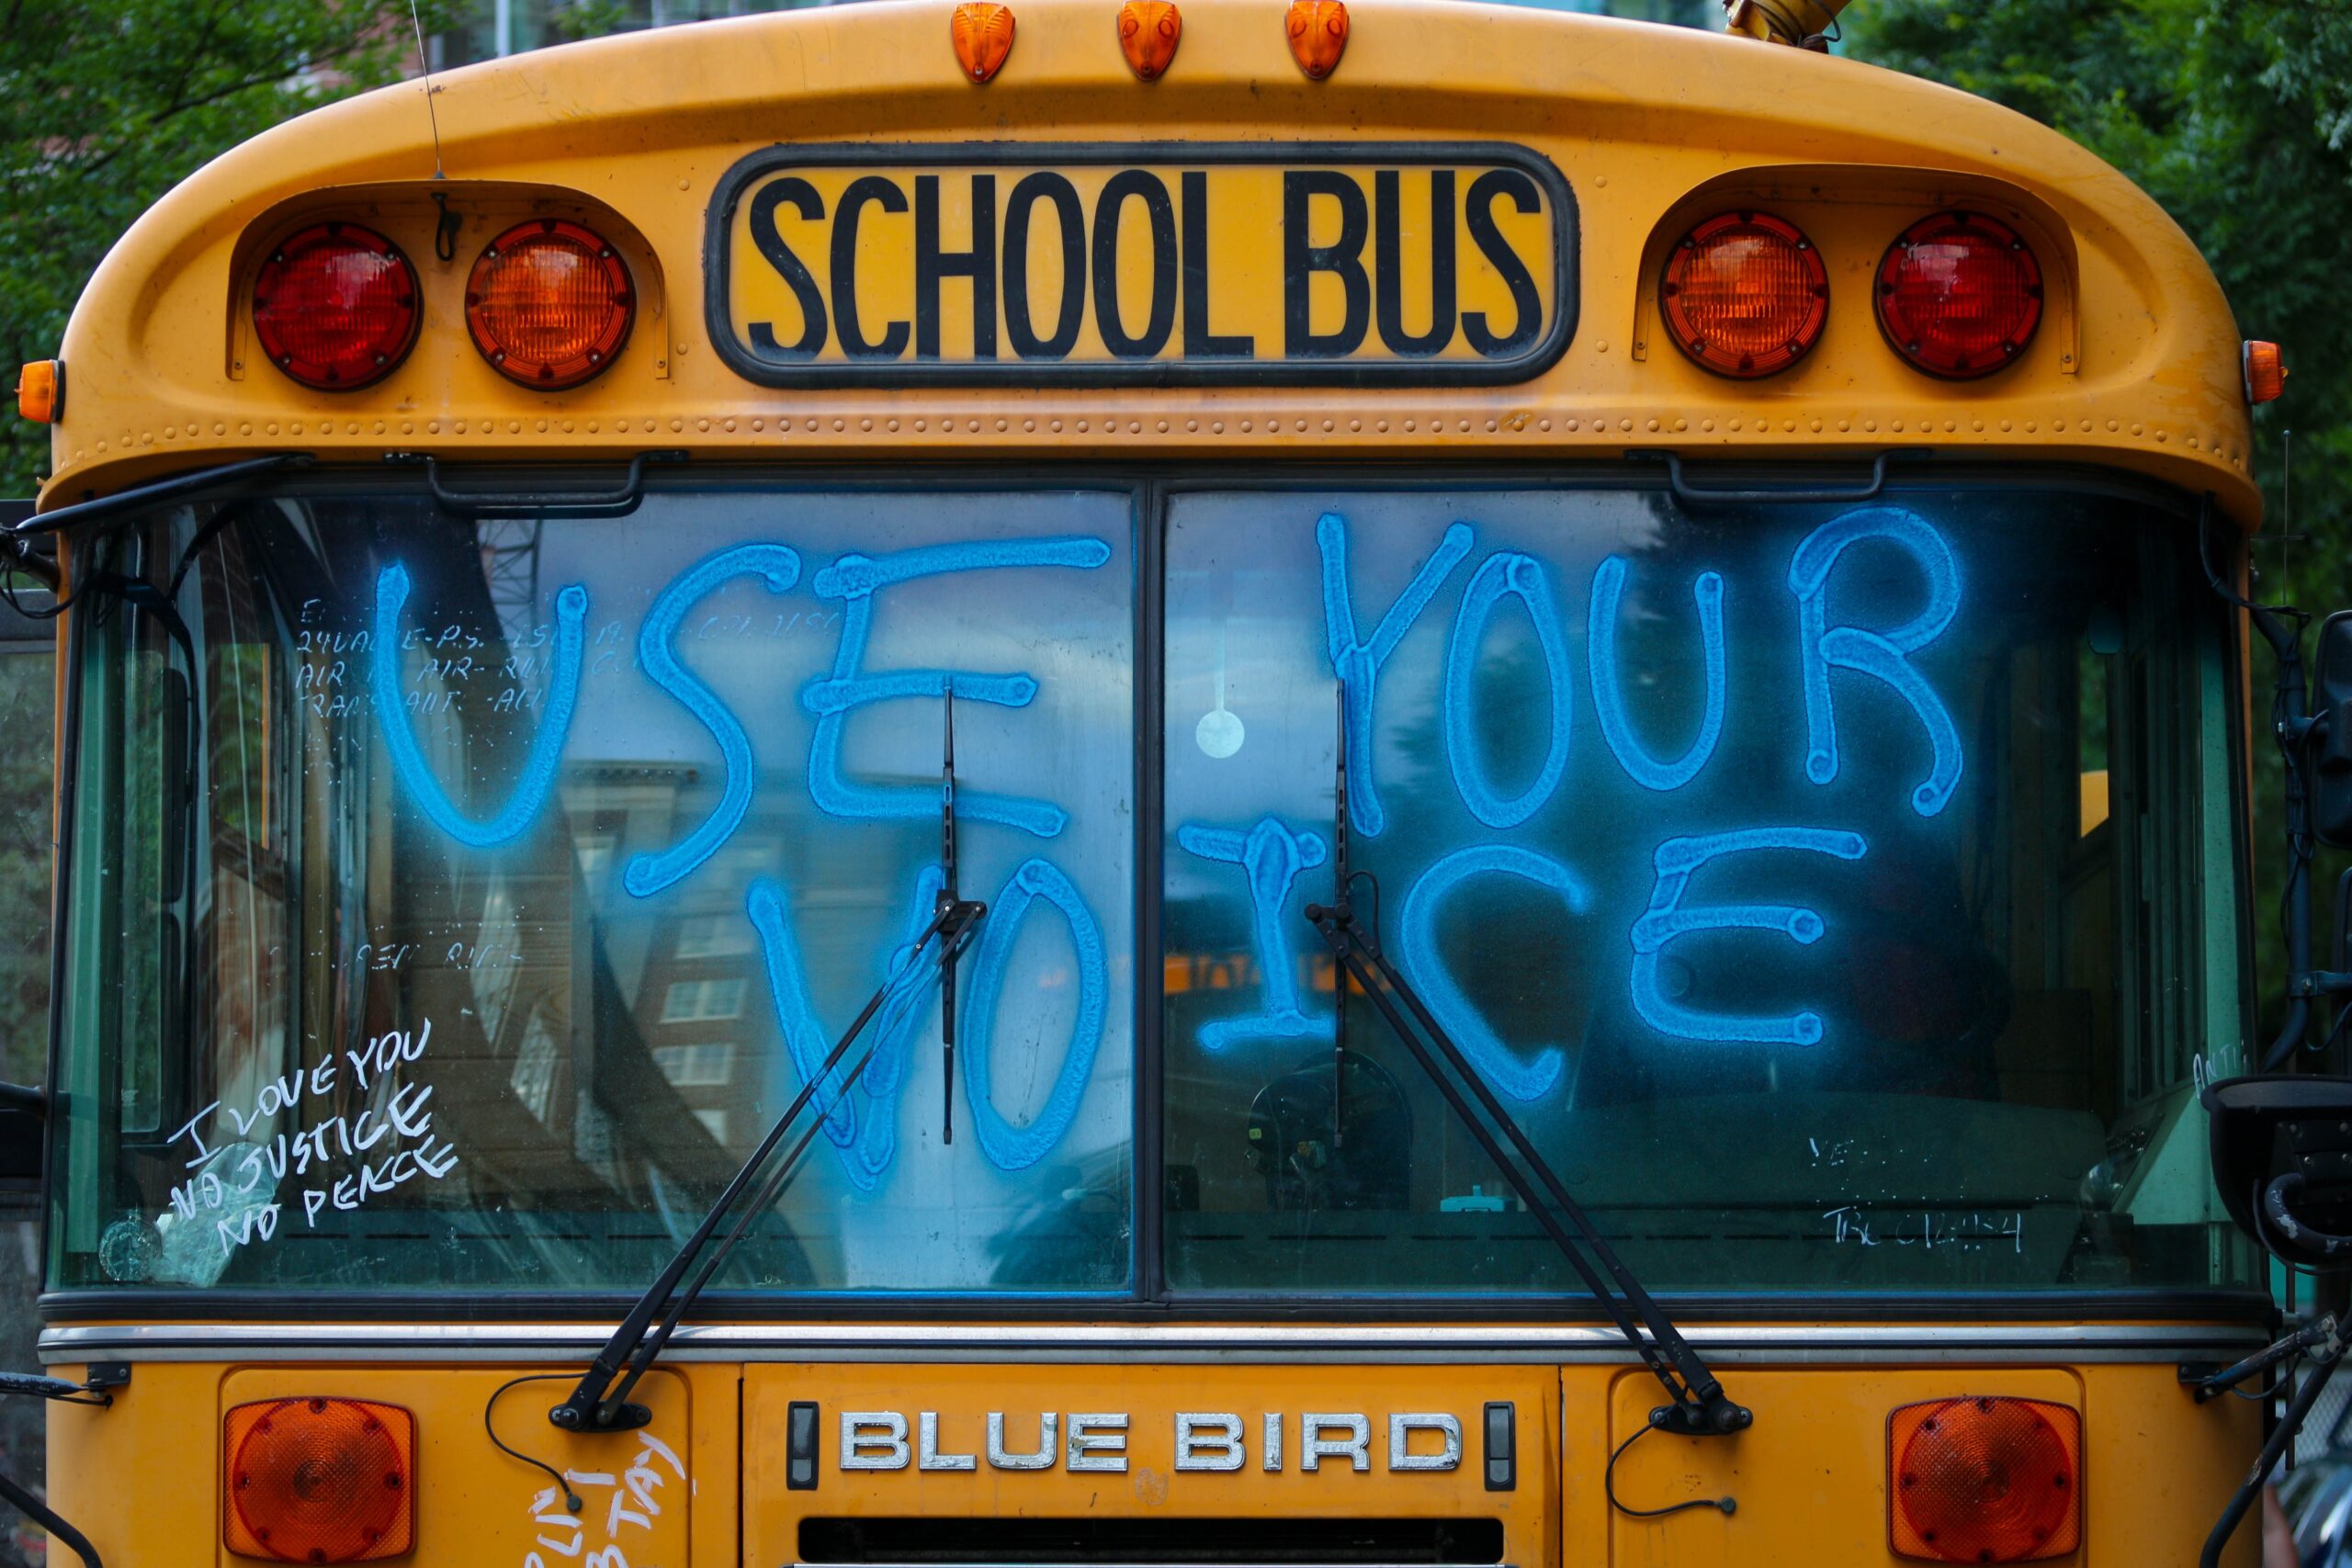 a school bus with "use your voice" spray painted on it